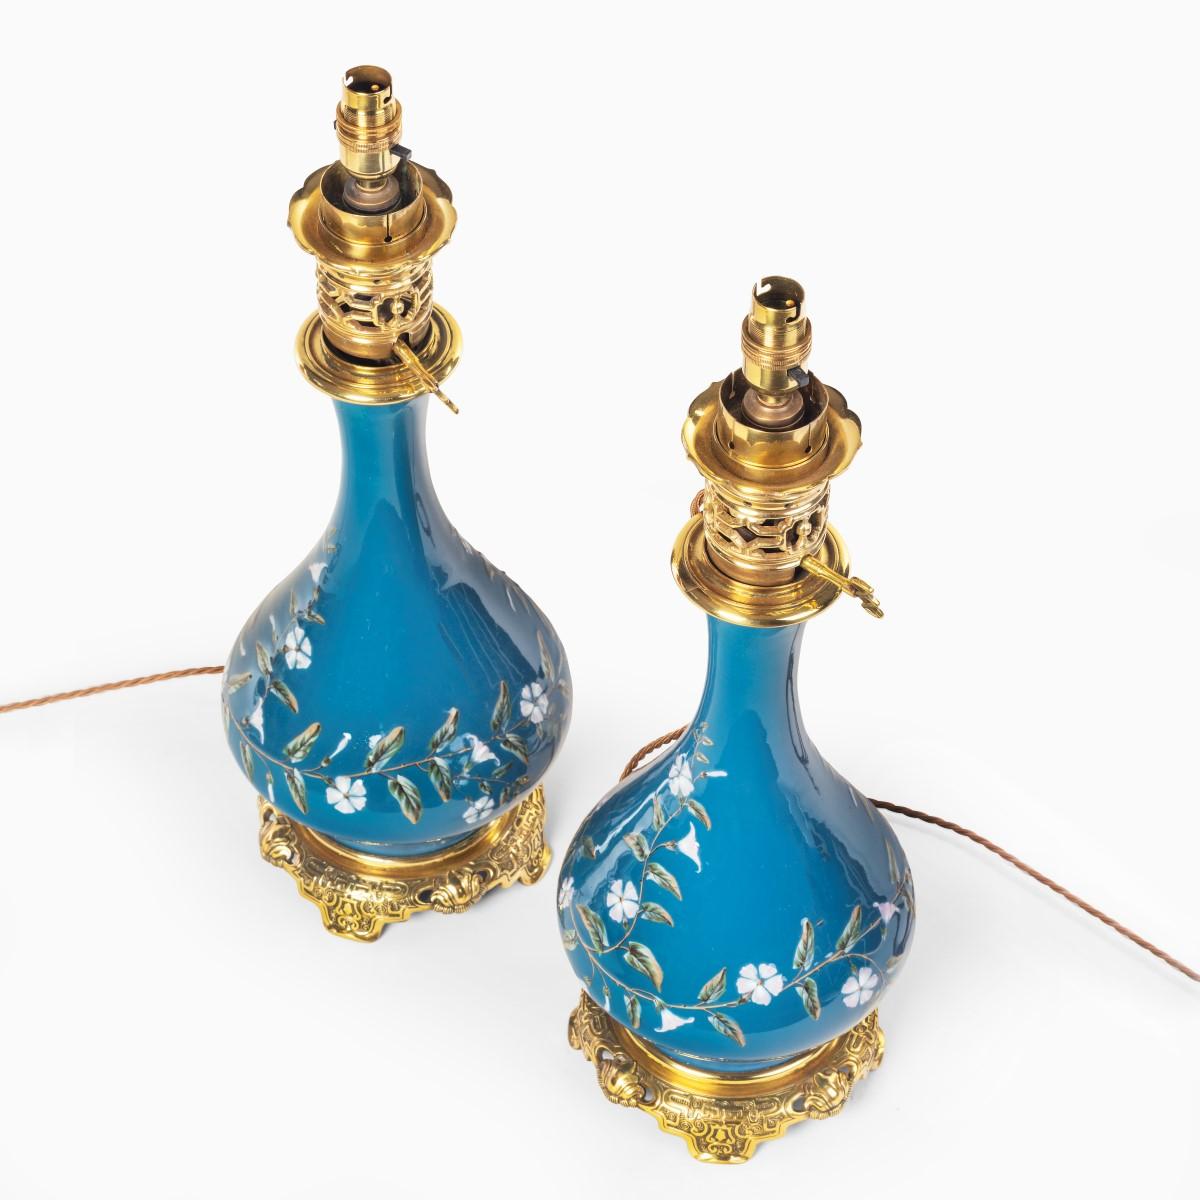 A pair of French pate-sur-pate ceramic oil lamps